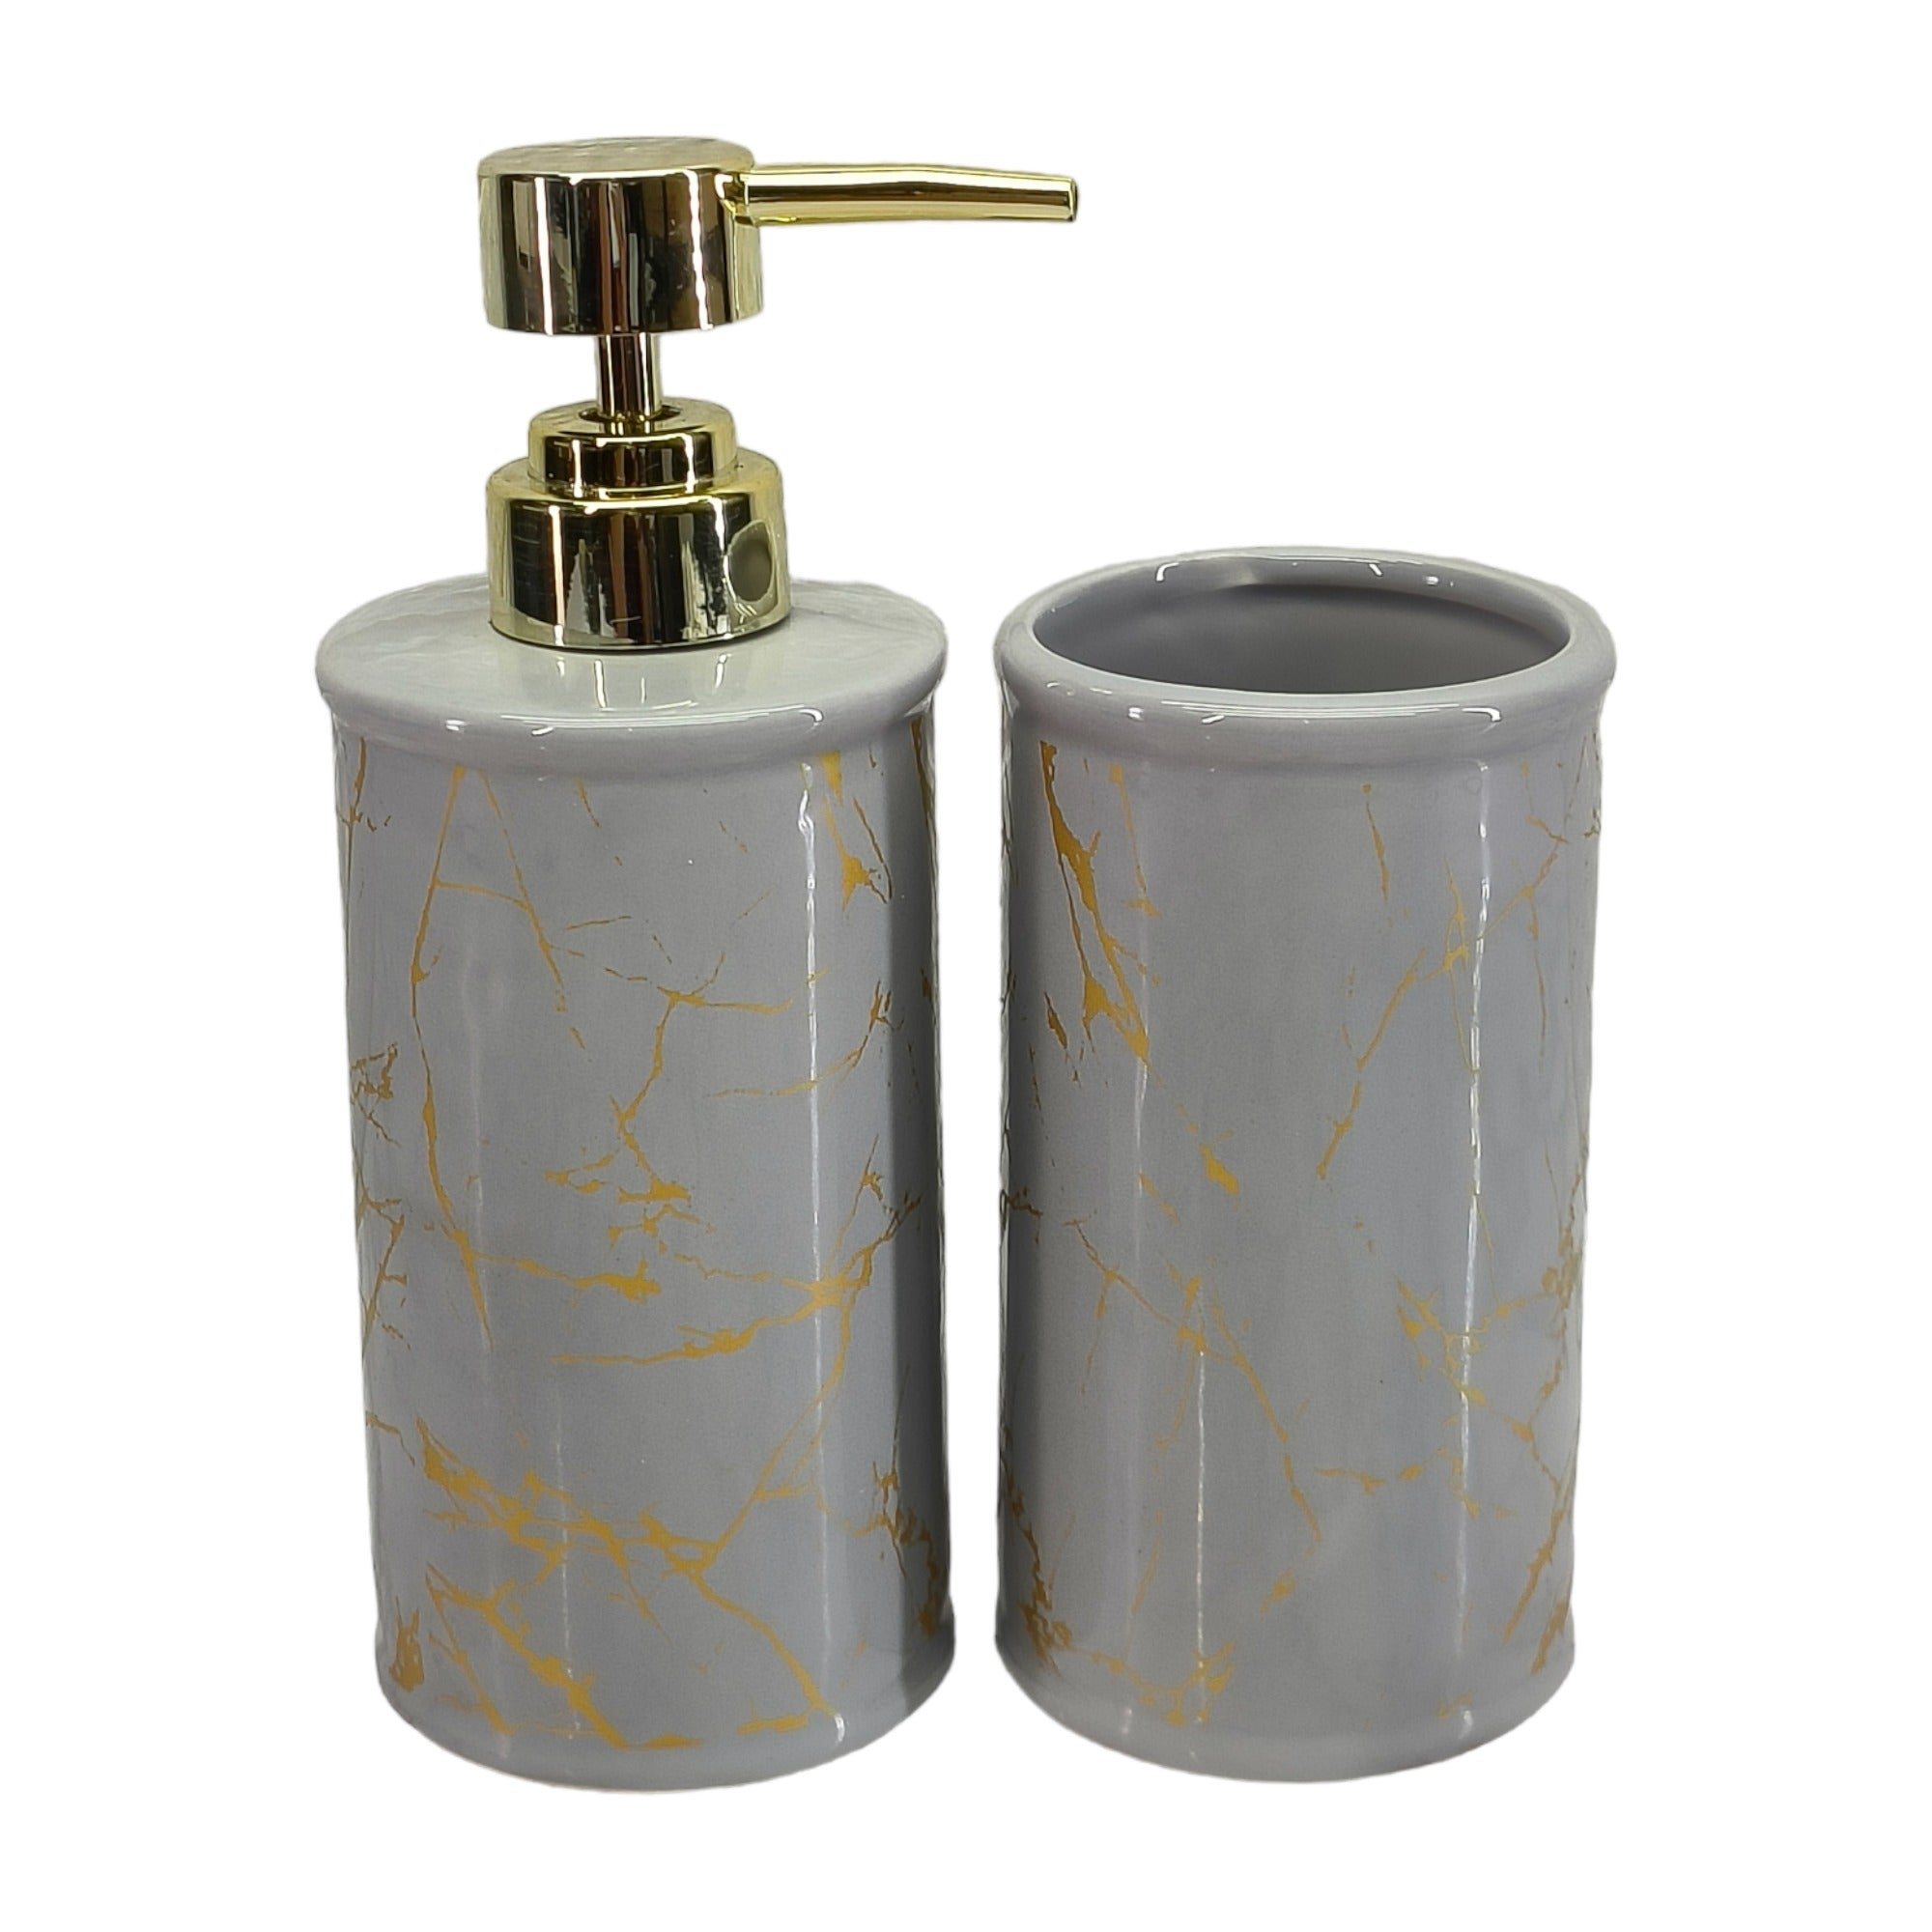 Ceramic Soap Dispenser Set with Toothbrush Holder, Set of 2 Bathroom Accessories for Home (C2082)